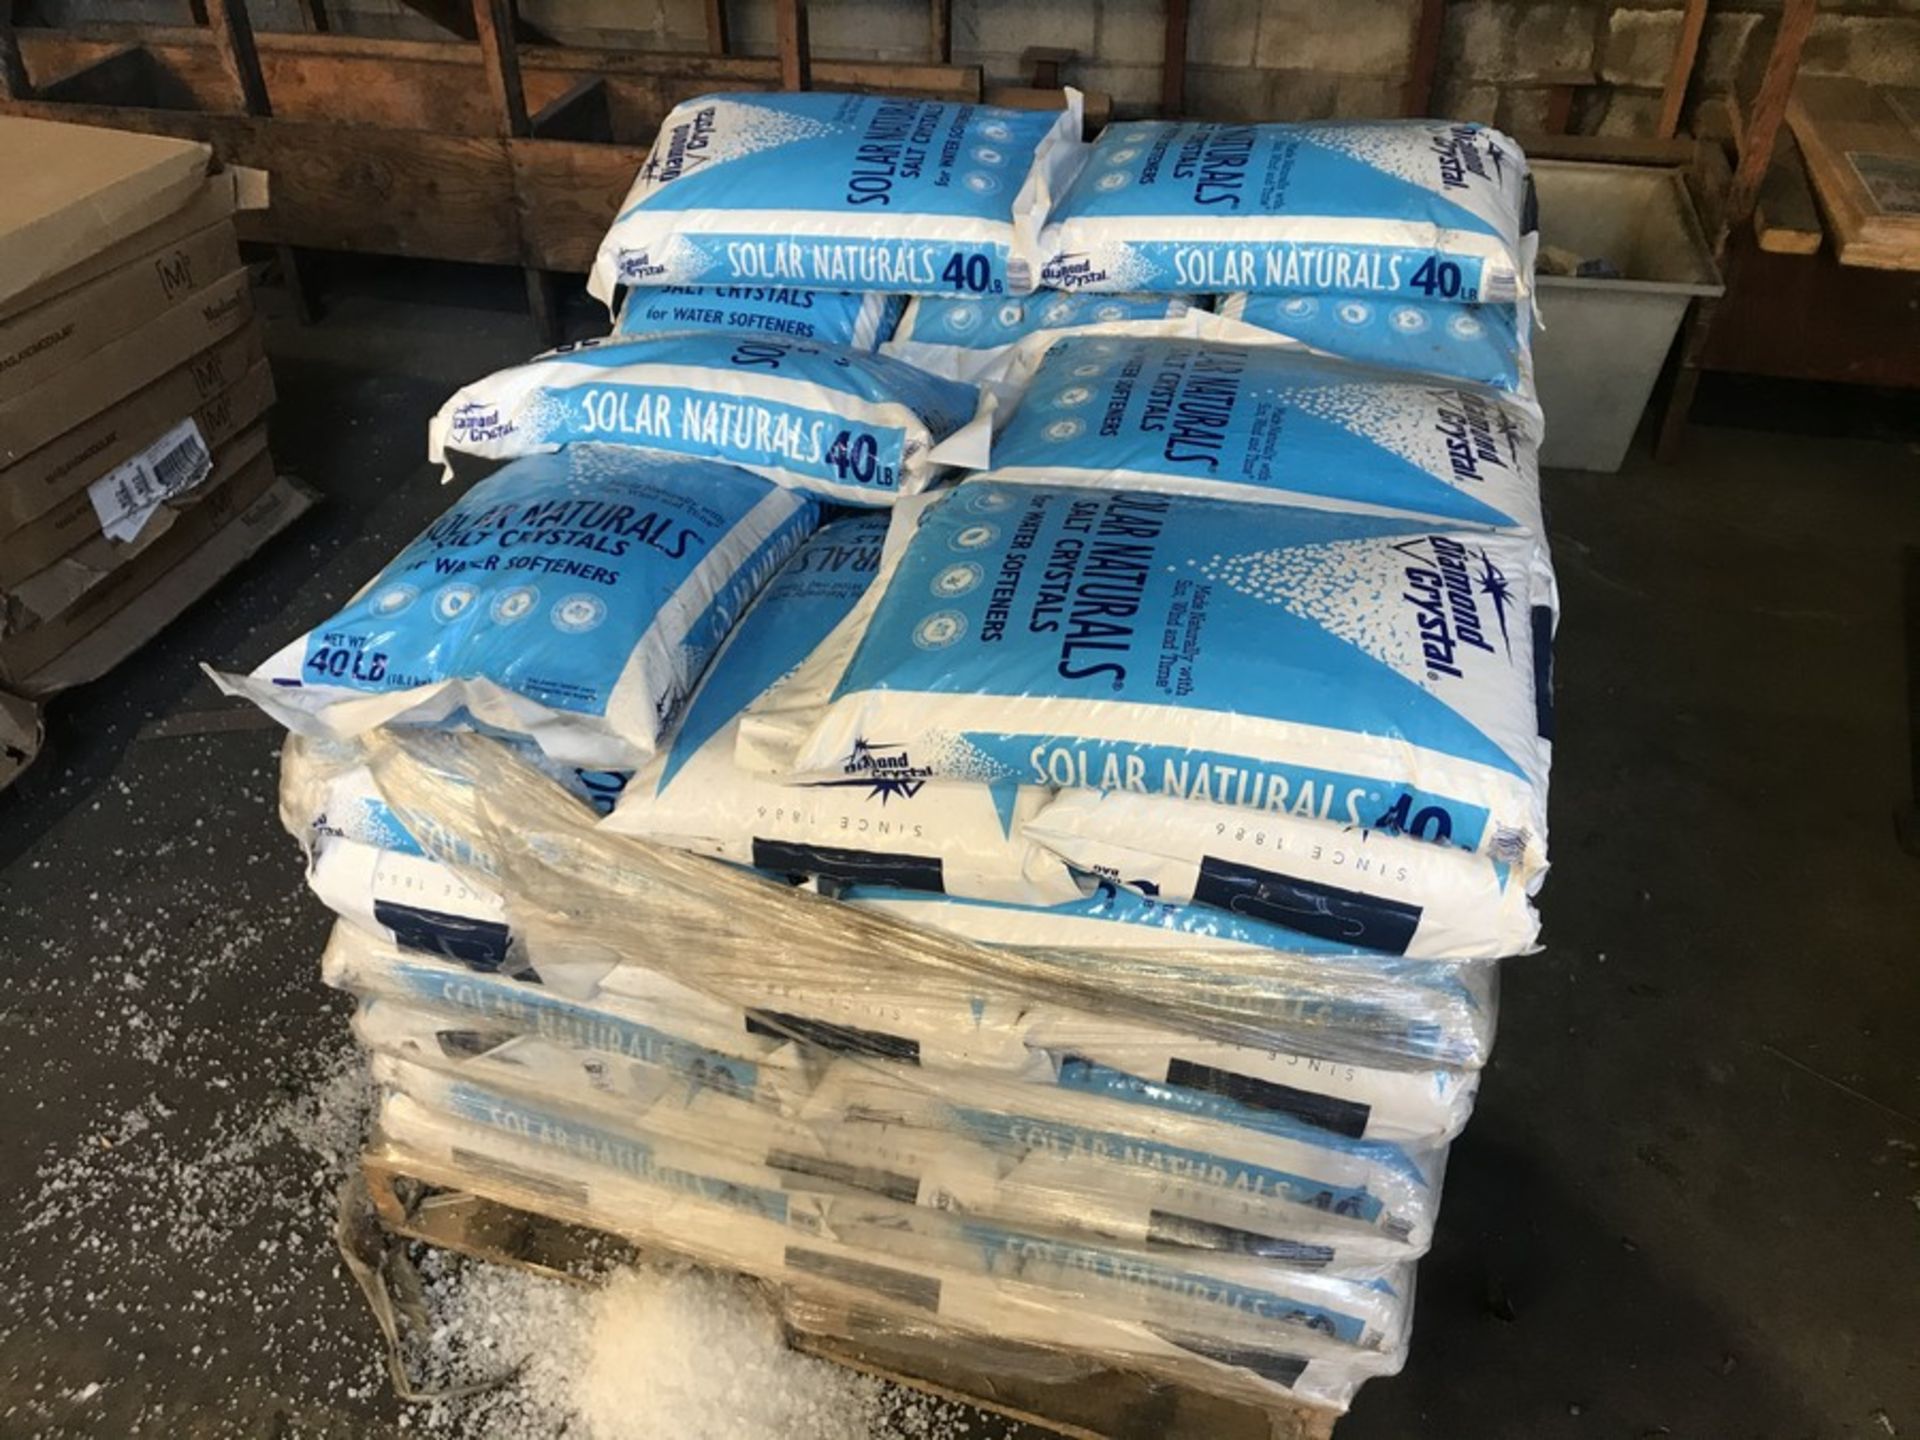 5 BAGS OF SALT CRYSTALS FOR WATER SOFTENERS